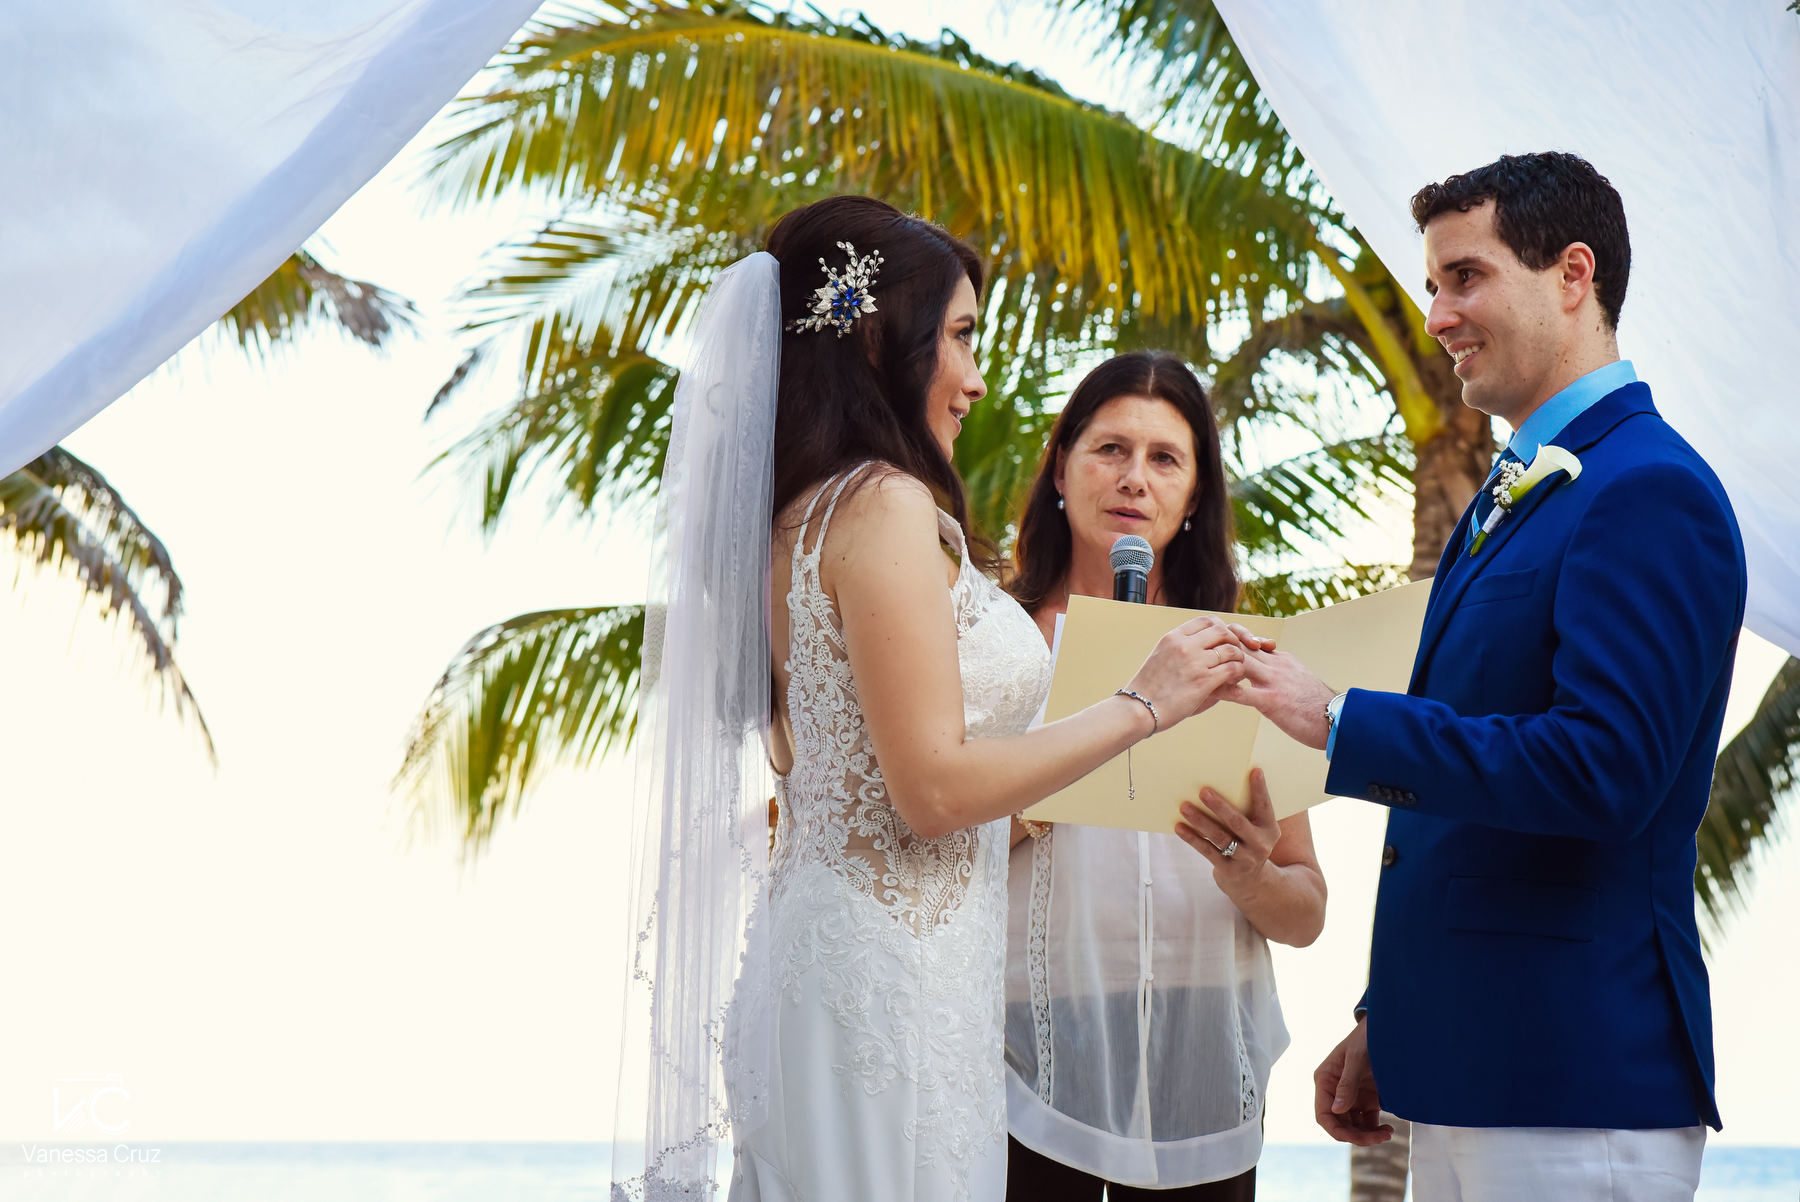 Exchange rings bride and groom private beach ceremony Playa del Carmen Mexico